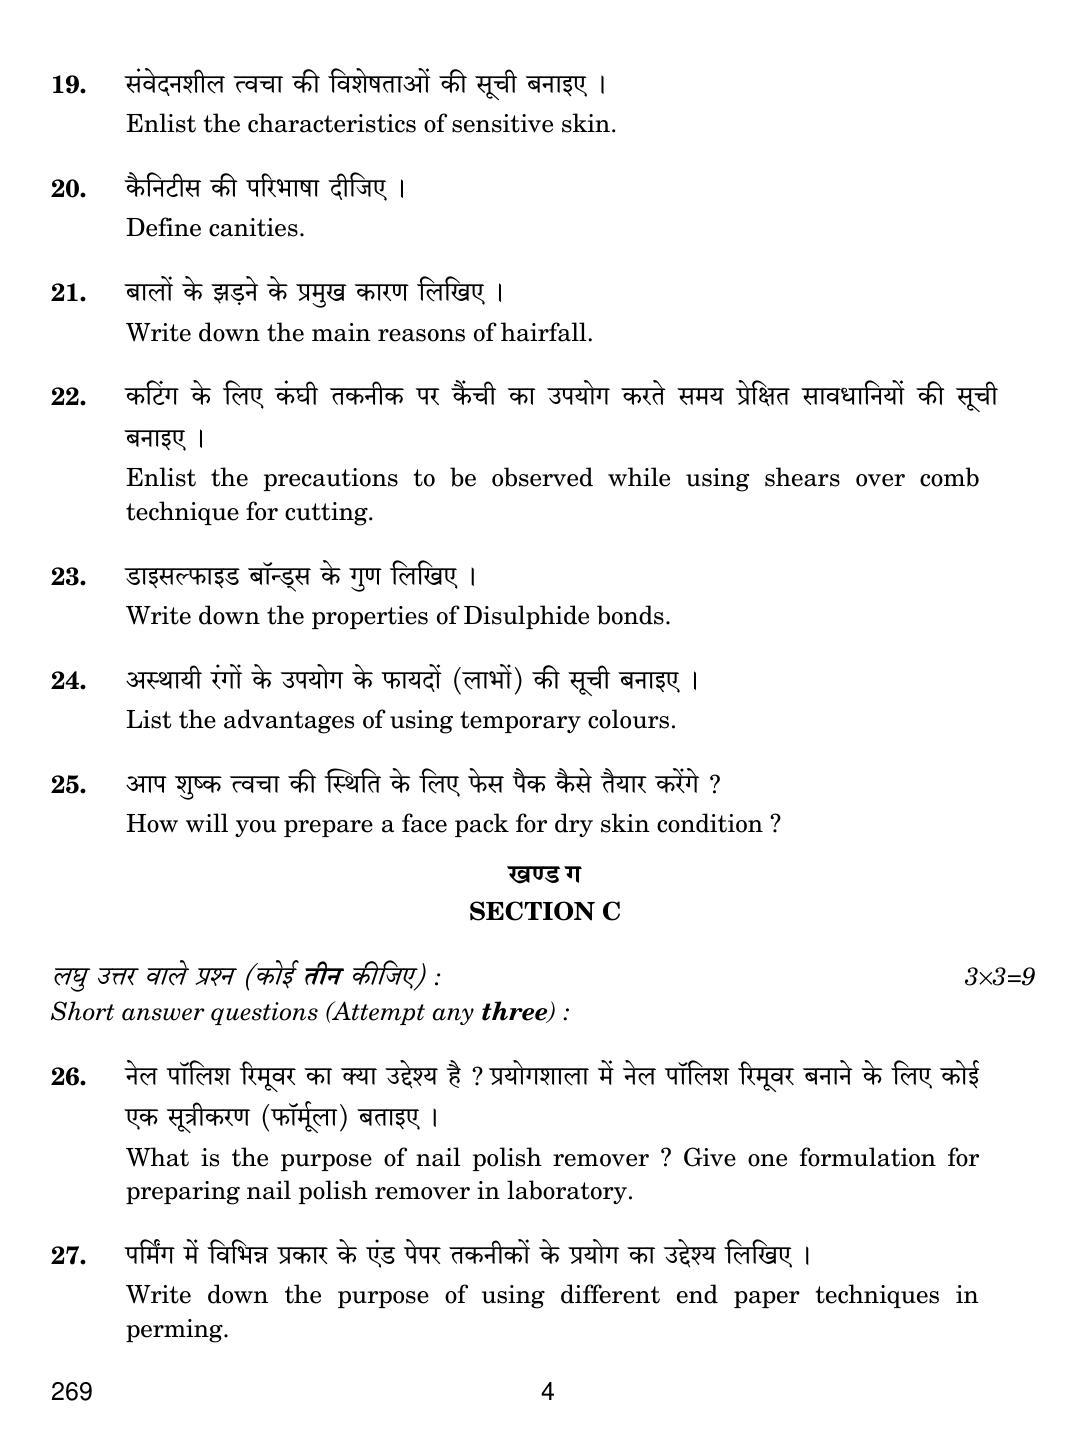 CBSE Class 12 269 BEAUTY AND HAIR 2018 Question Paper - Page 4